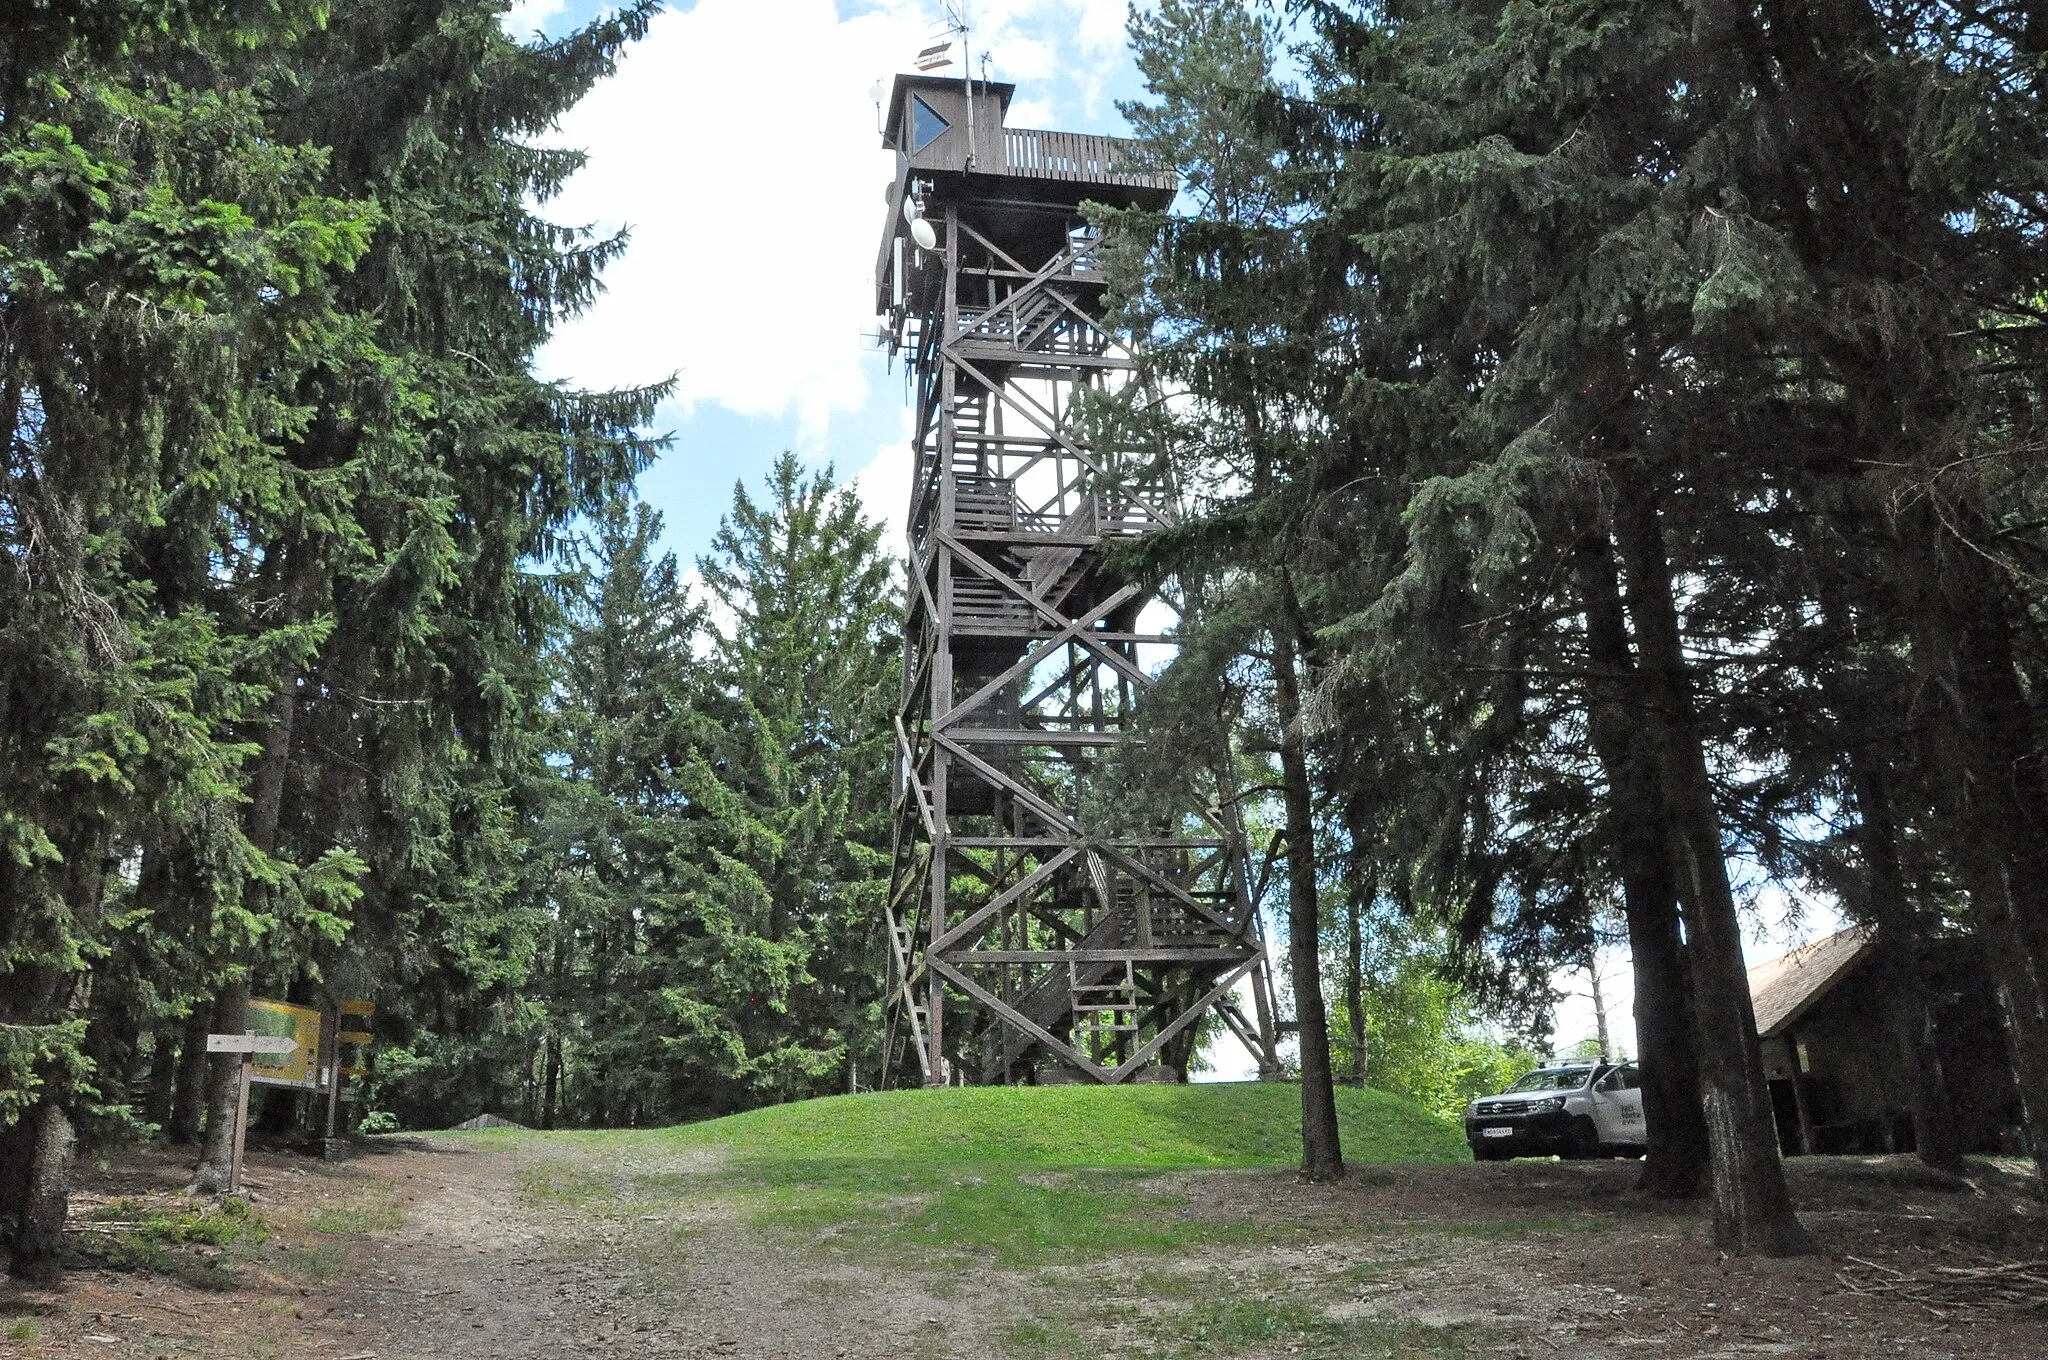 Photo showing: The observation tower at the Hutwisch in the municipality of Hochneukirchen-Gschaidt. West view, from the direct hiking trail no. 1.